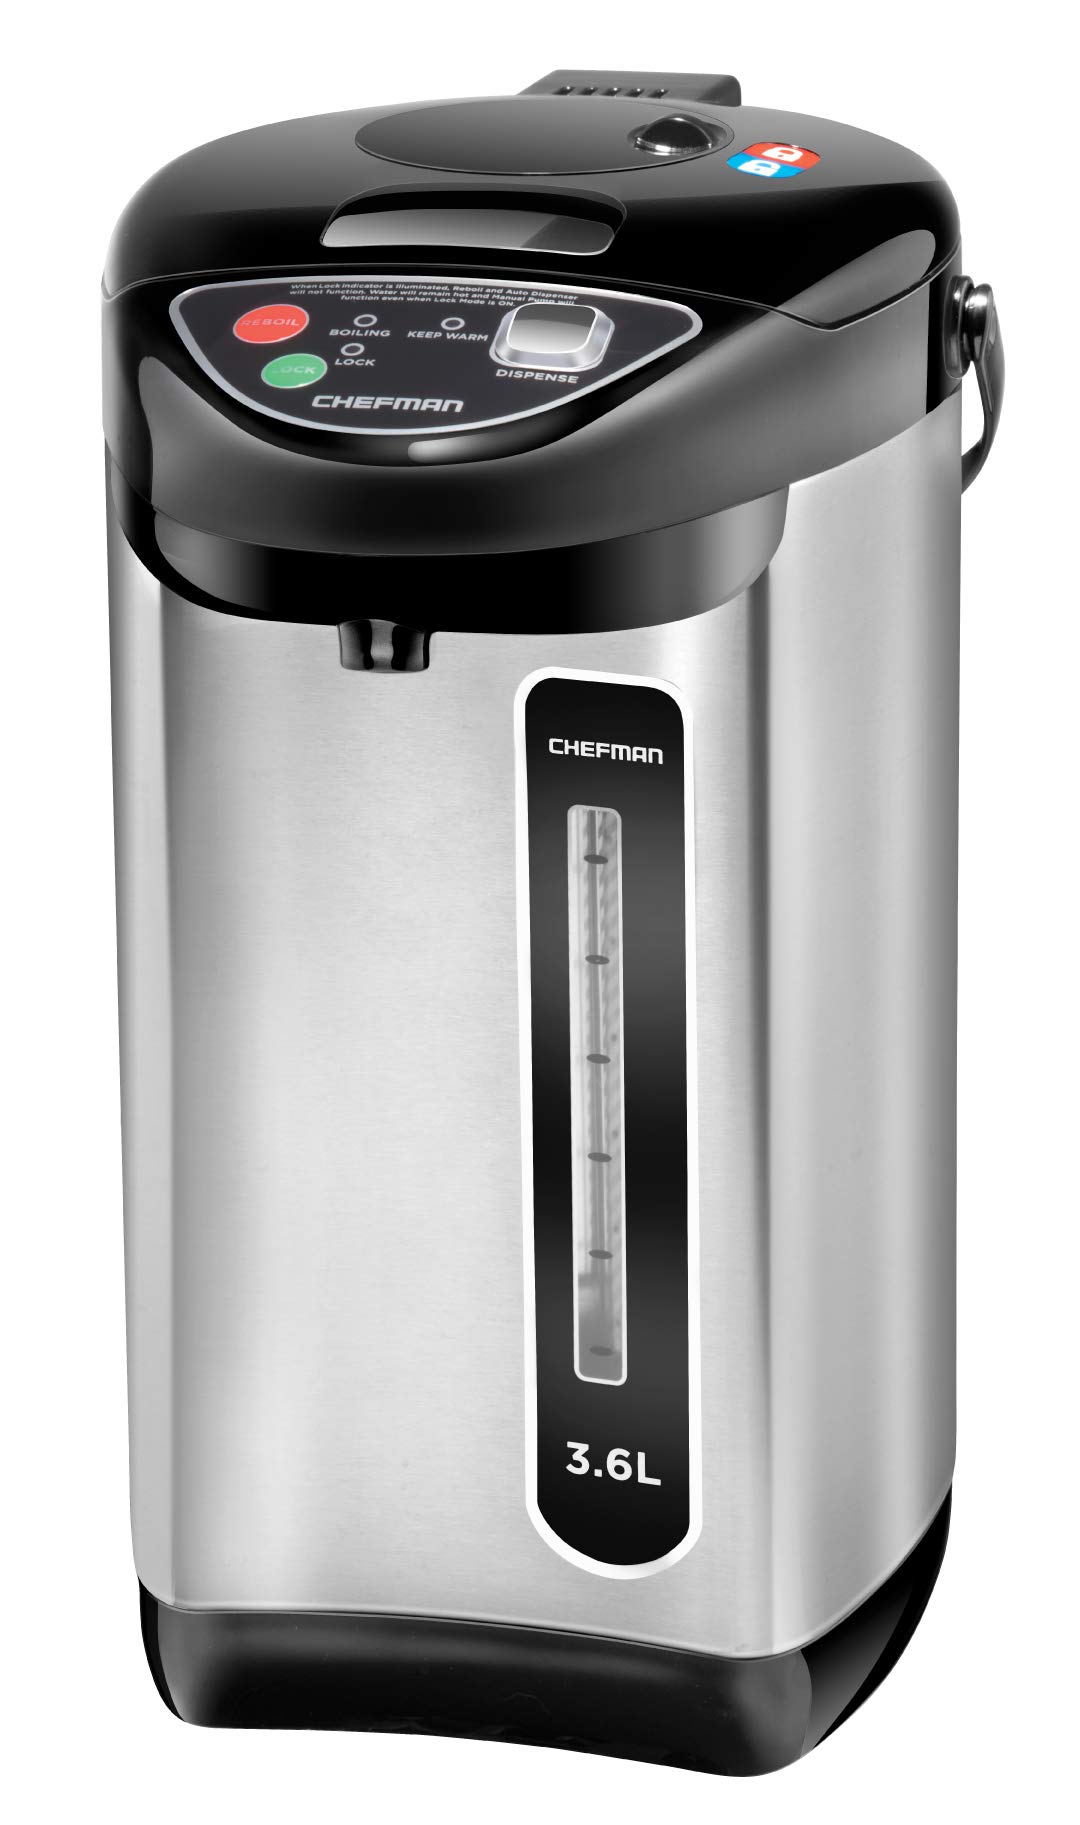 Chefman Electric Hot Water Pot Urn w/ Auto & Manual Dispense Buttons, Safety Lock, Instant Heating for Coffee & Tea, Auto-Shutoff/Boil Dry Protection